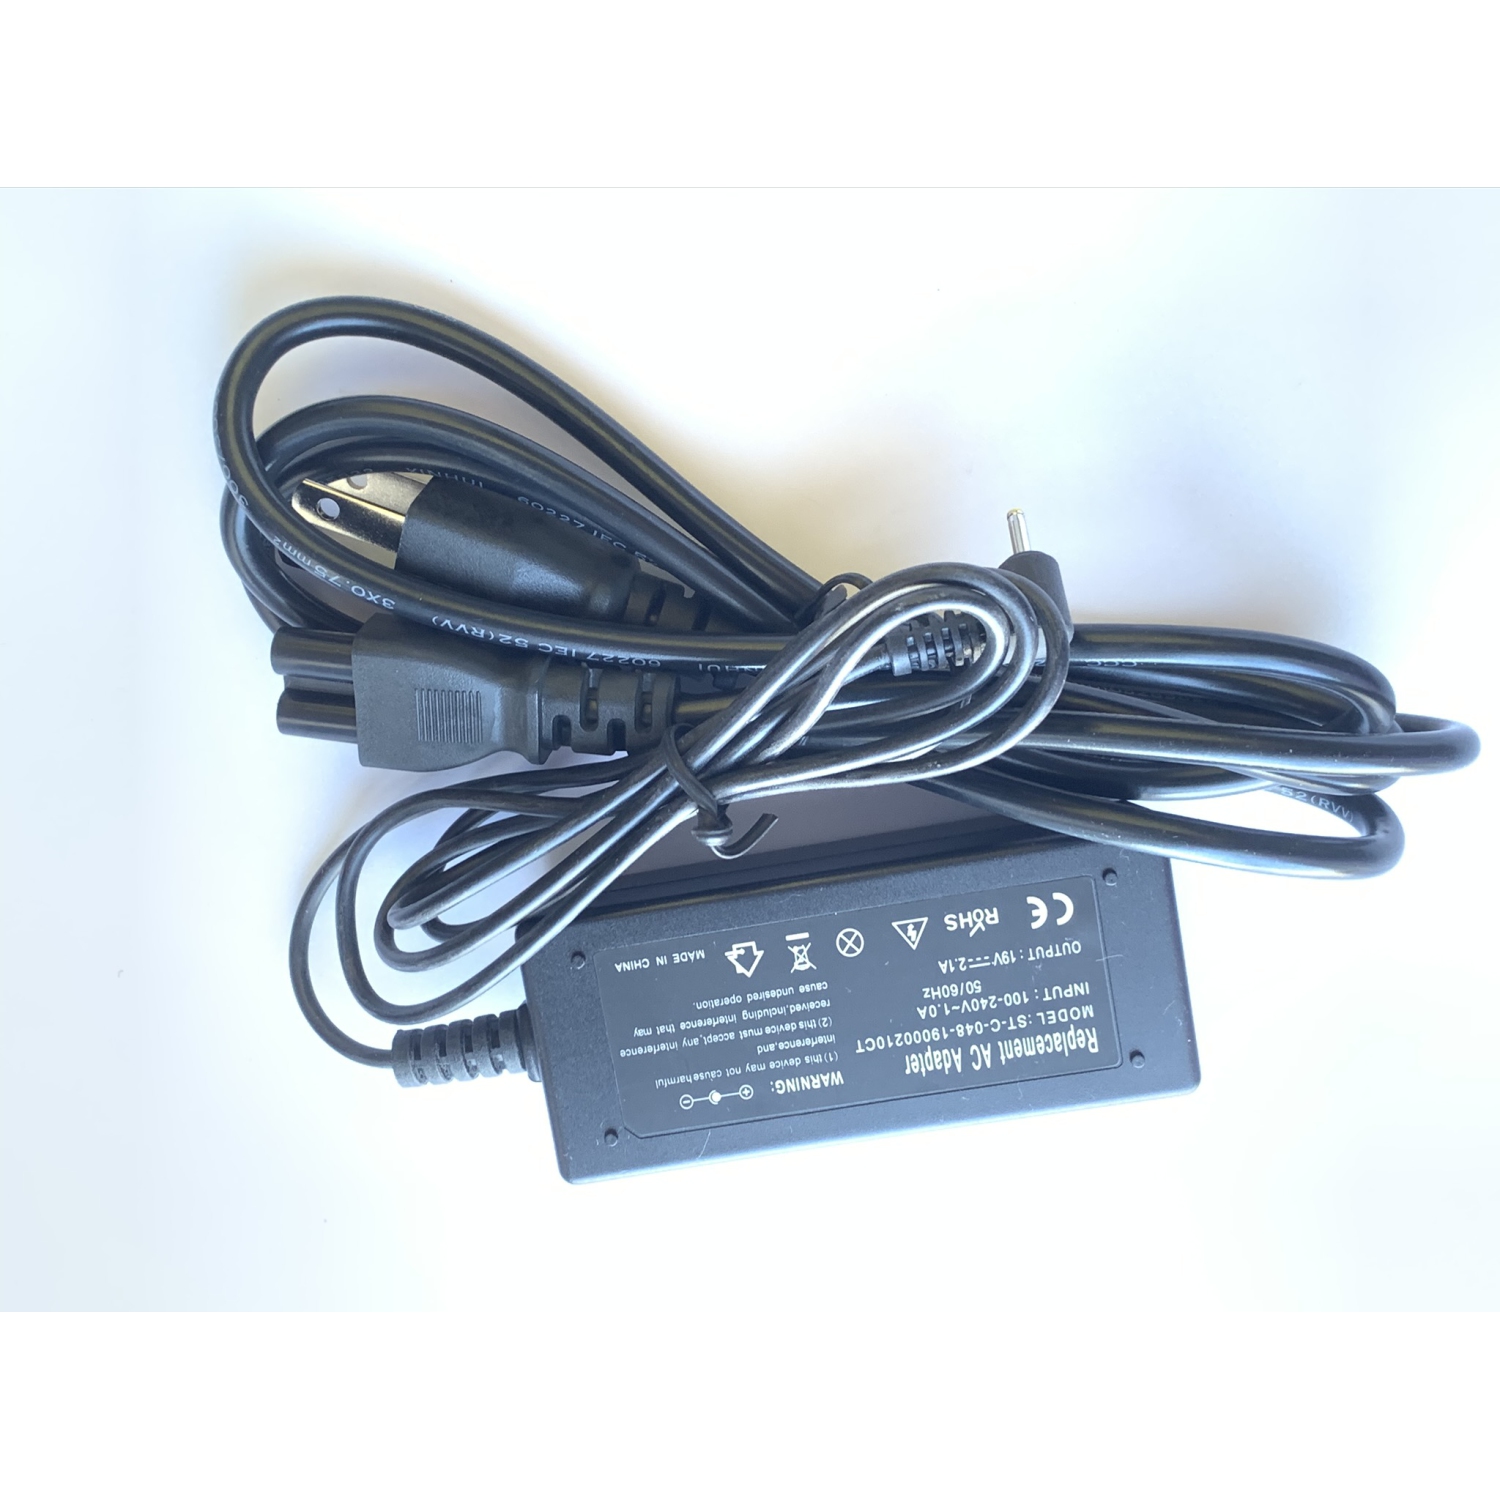 19V 2.1A 40W AC adapter power cord charger for Asus Eee PC 1001PQ 1005HA-R1008HAG 1015T